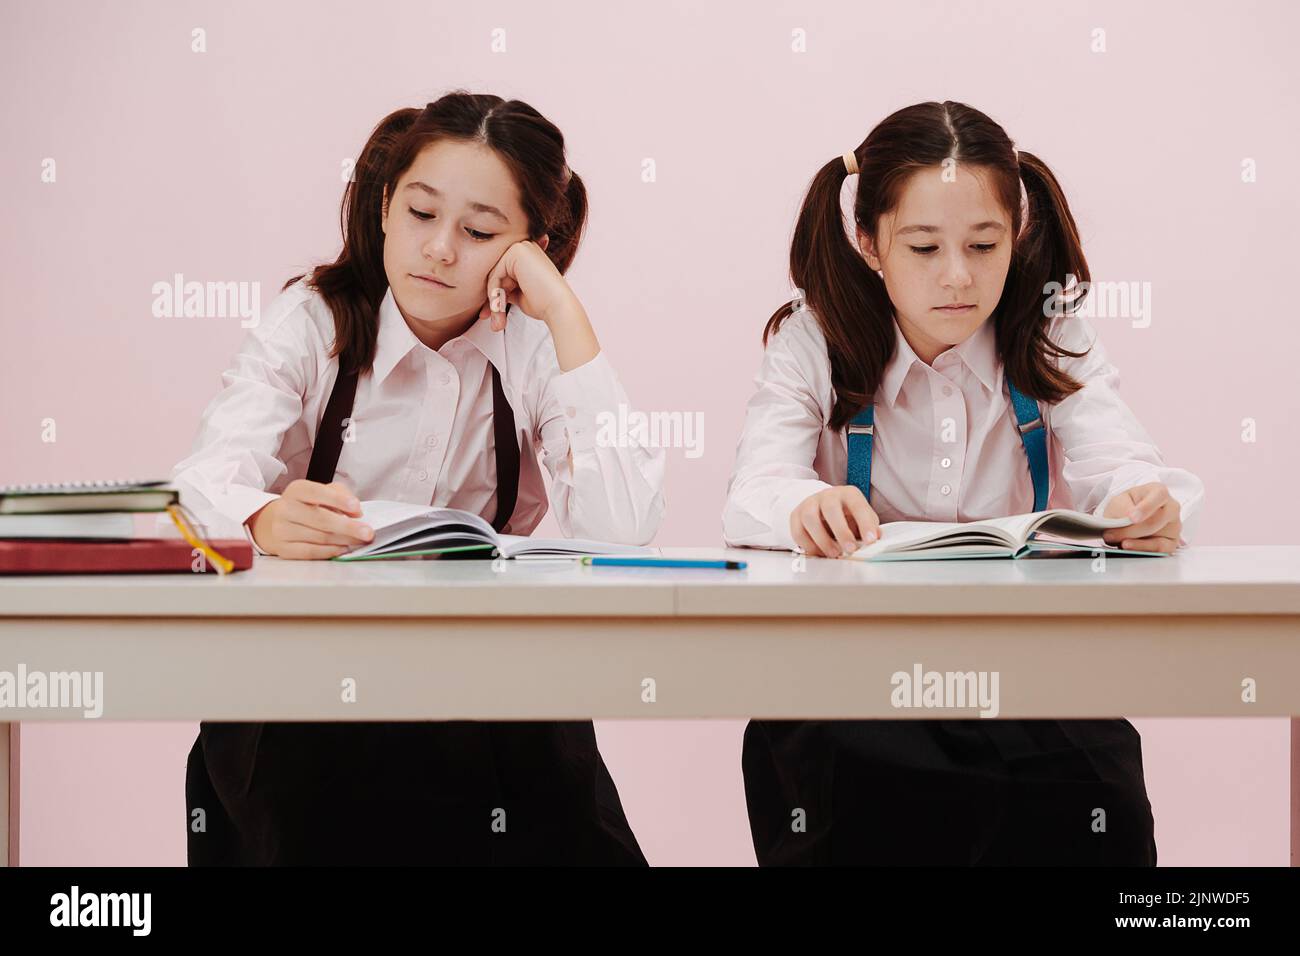 A bit bored schoolgirl twins learning from textbooks, sitting behind the desk at school. They are wearig twintails, shirts and suspenders. over pink b Stock Photo